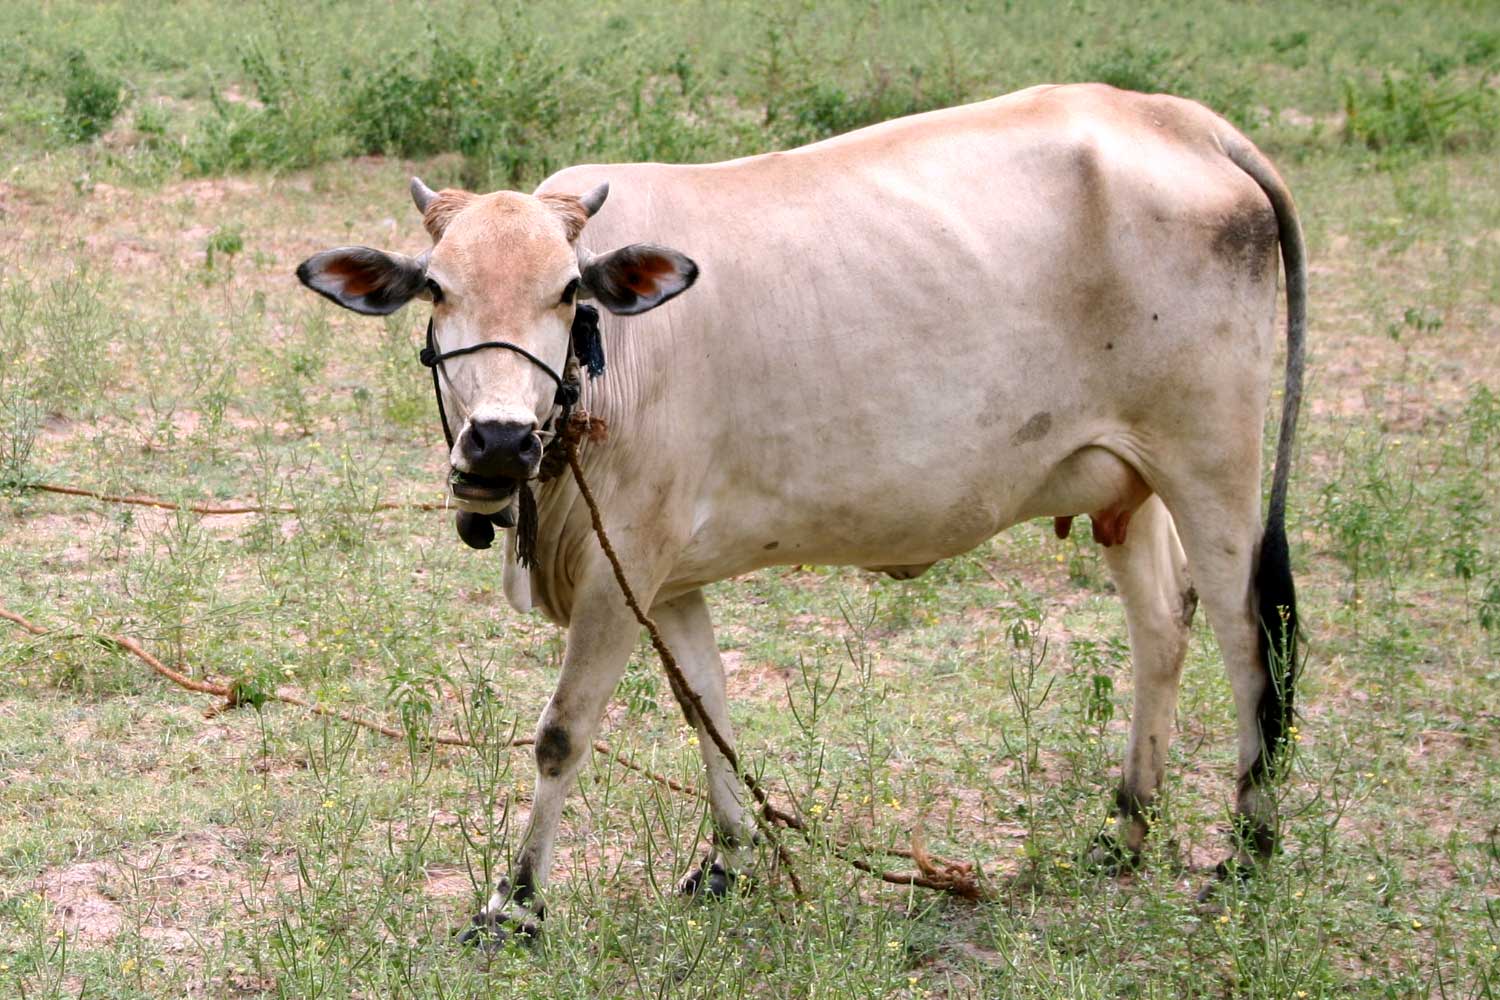 a white cow with two bells walking across the grass